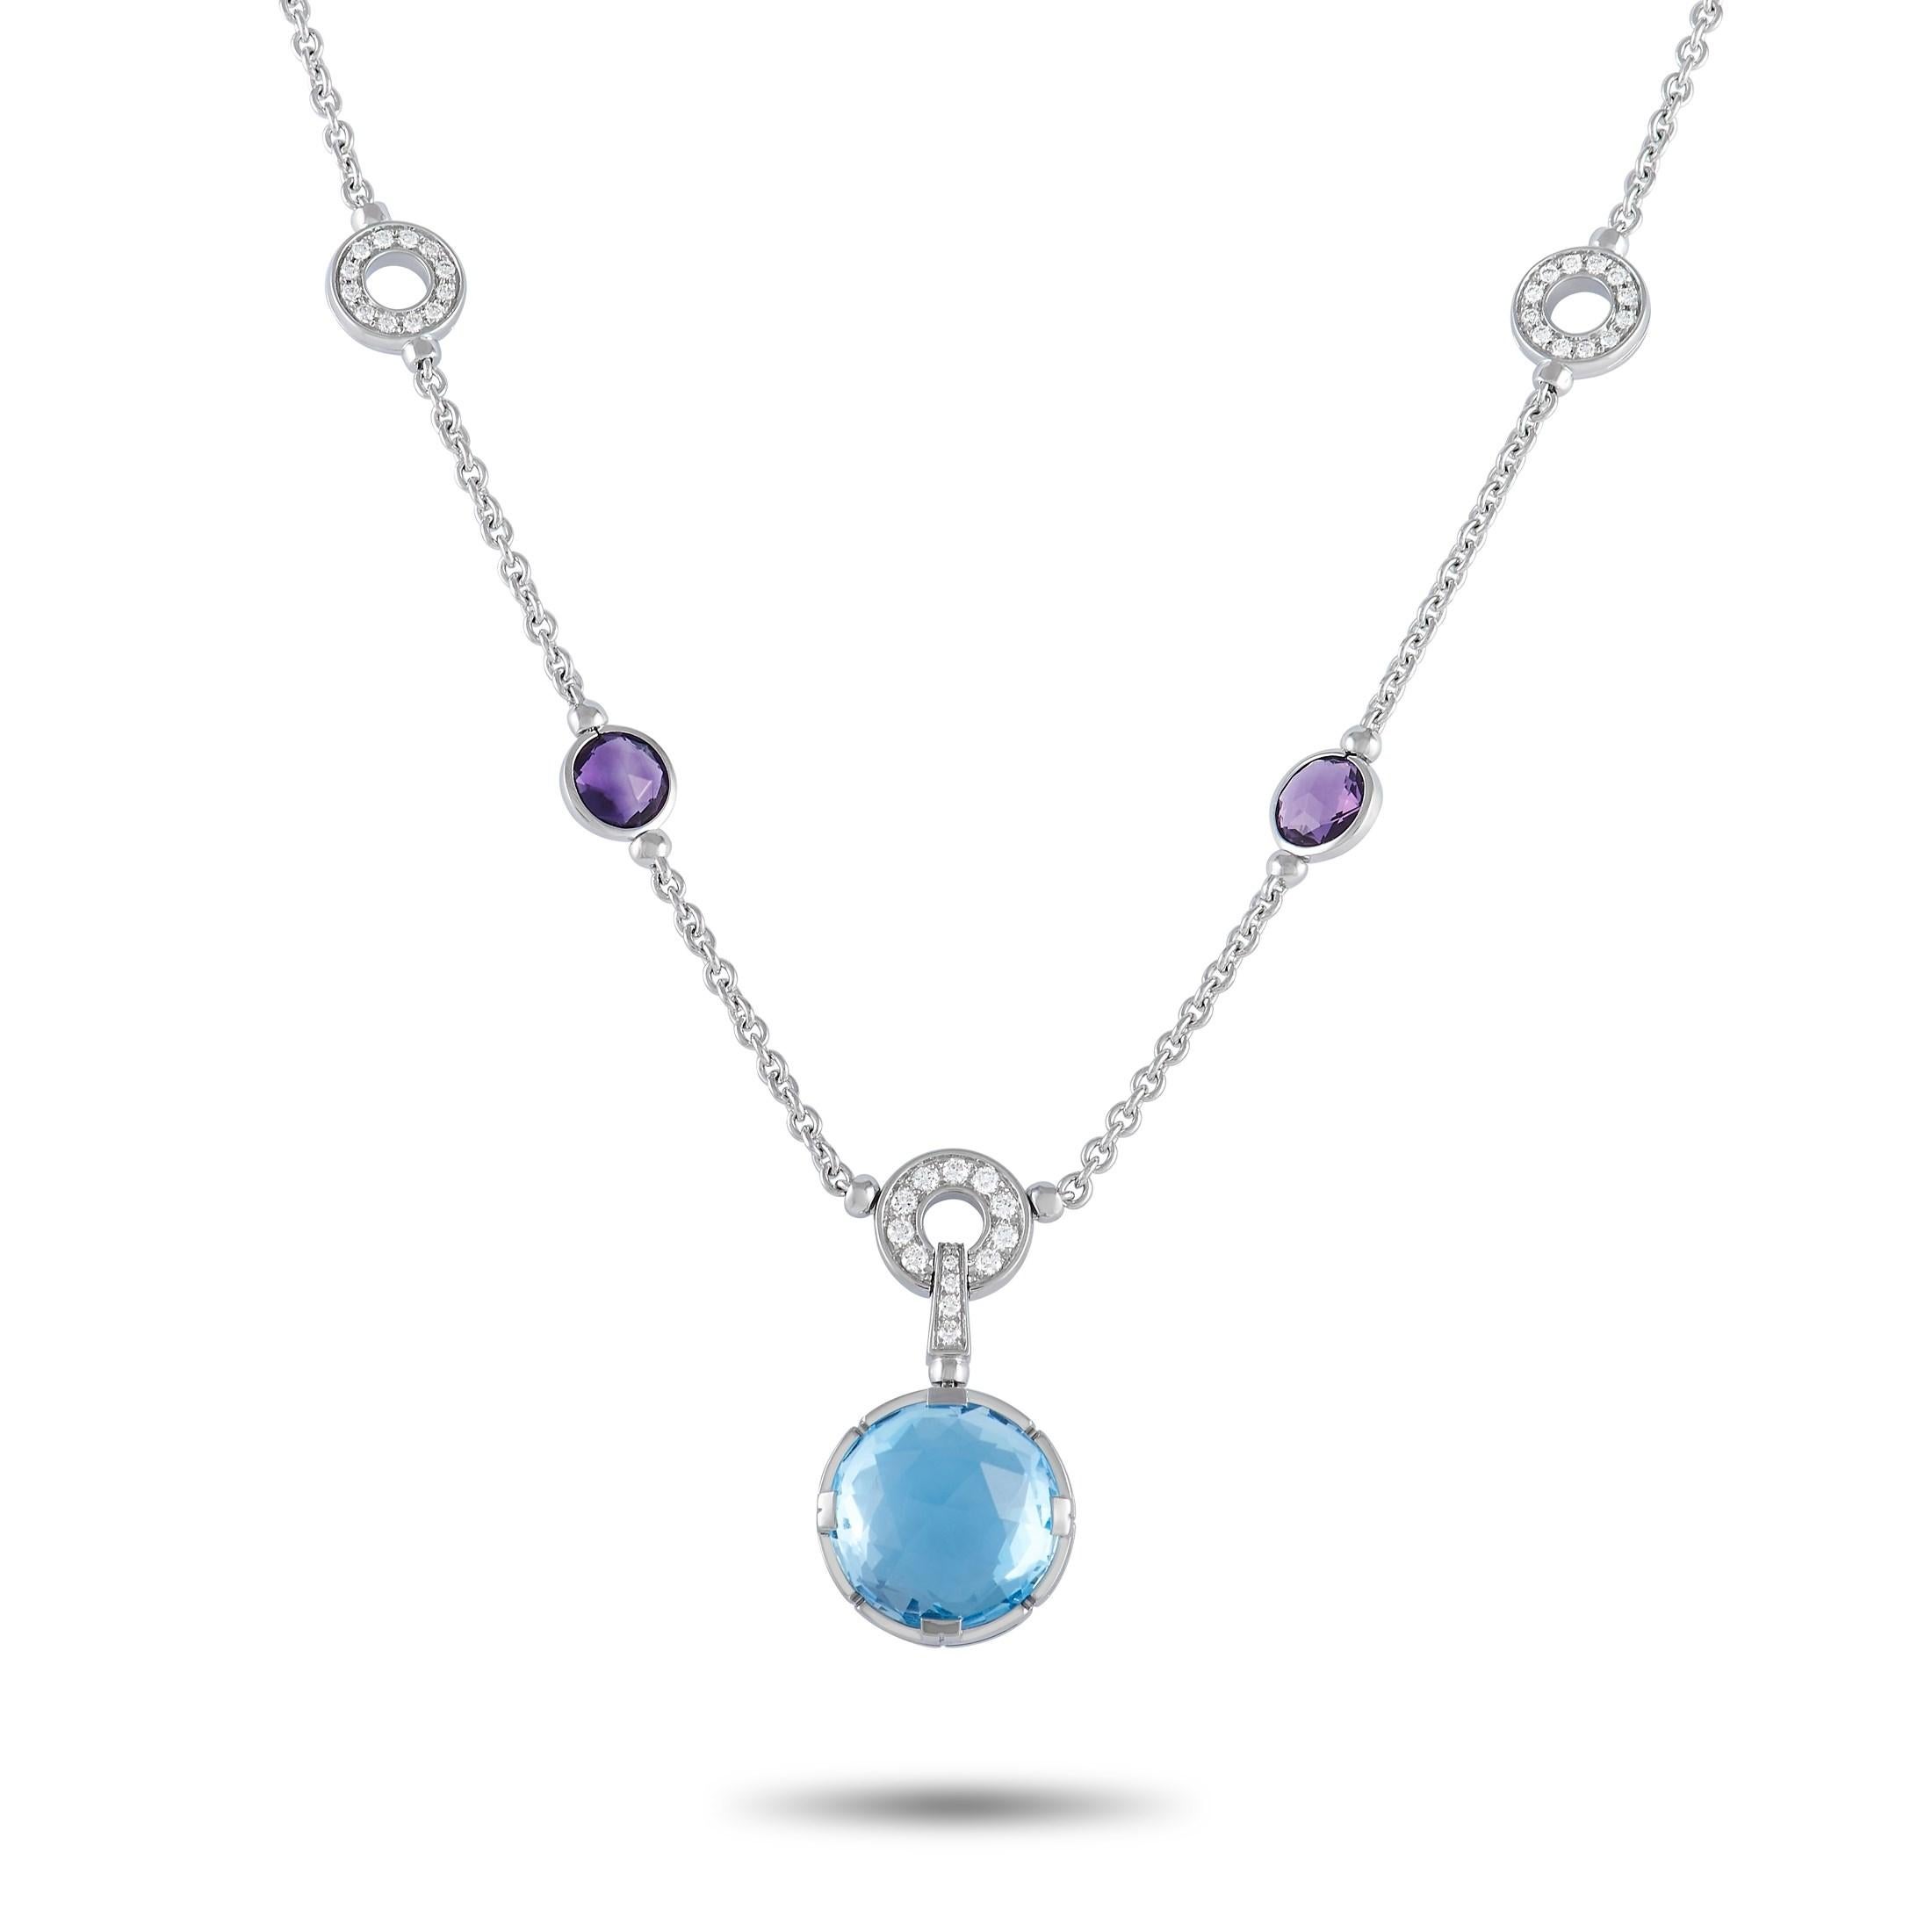 This Bvlgari Parentesi necklace is an exquisite piece that will always capture your imagination. On the 16.5” long 18K white gold chain, you’ll find stylish purple Amethyst gemstones and inset diamond accents with a total weight of 0.70 carats. A